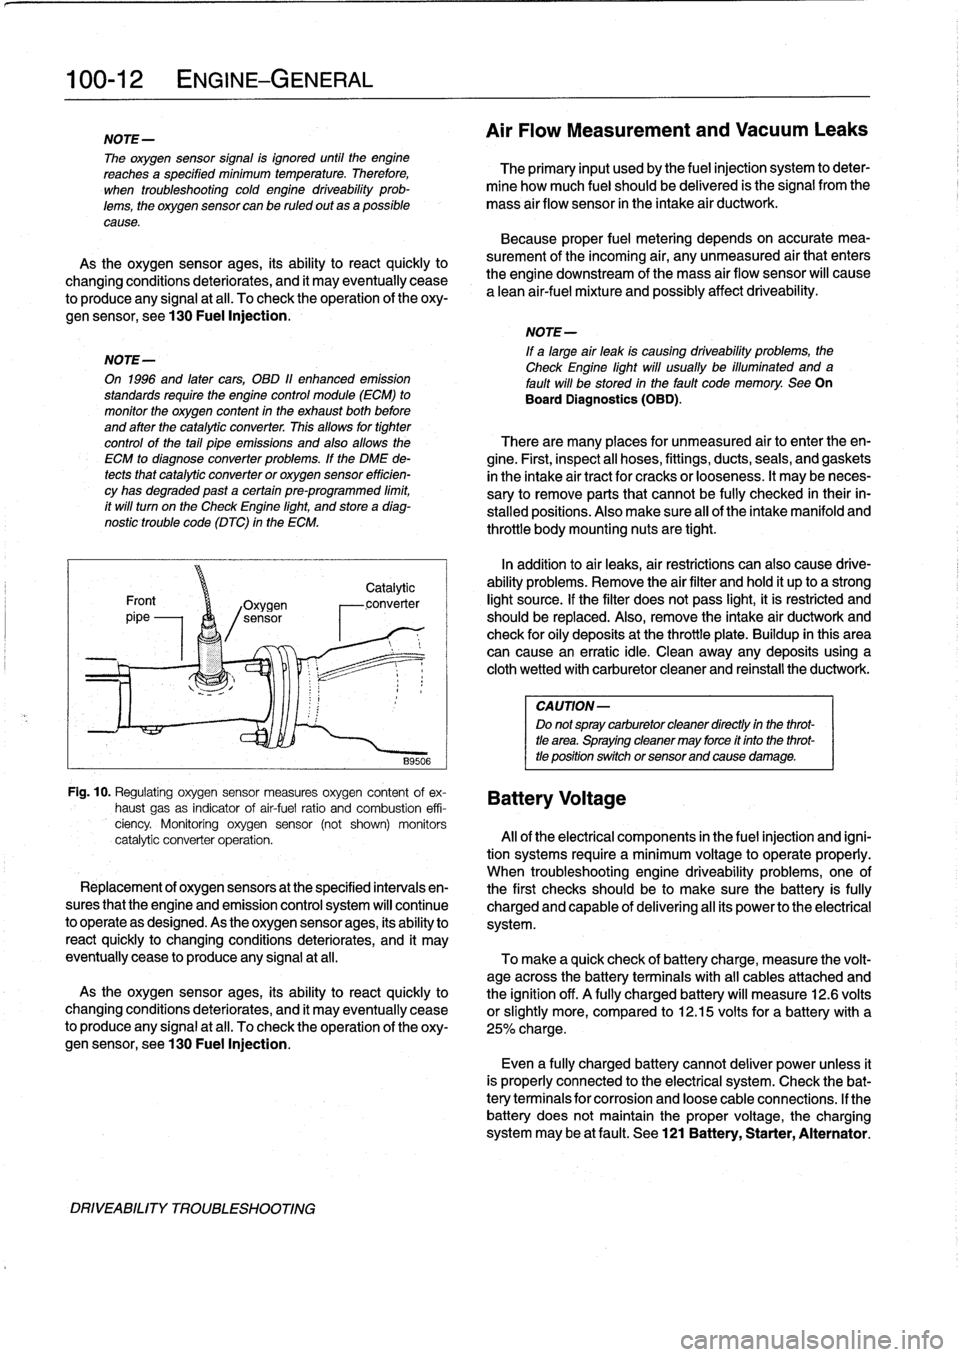 BMW 325i 1992 E36 Workshop Manual 
100-
1
2
ENGINE-GENERAL

NOTE-

The
oxygen
sensor
signal
is
ignored
until
the
engine
reachesa
specified
minimum
temperature
.
Therefore,

	

The
primary
input
usedby
the
fuel
injection
system
to
dete